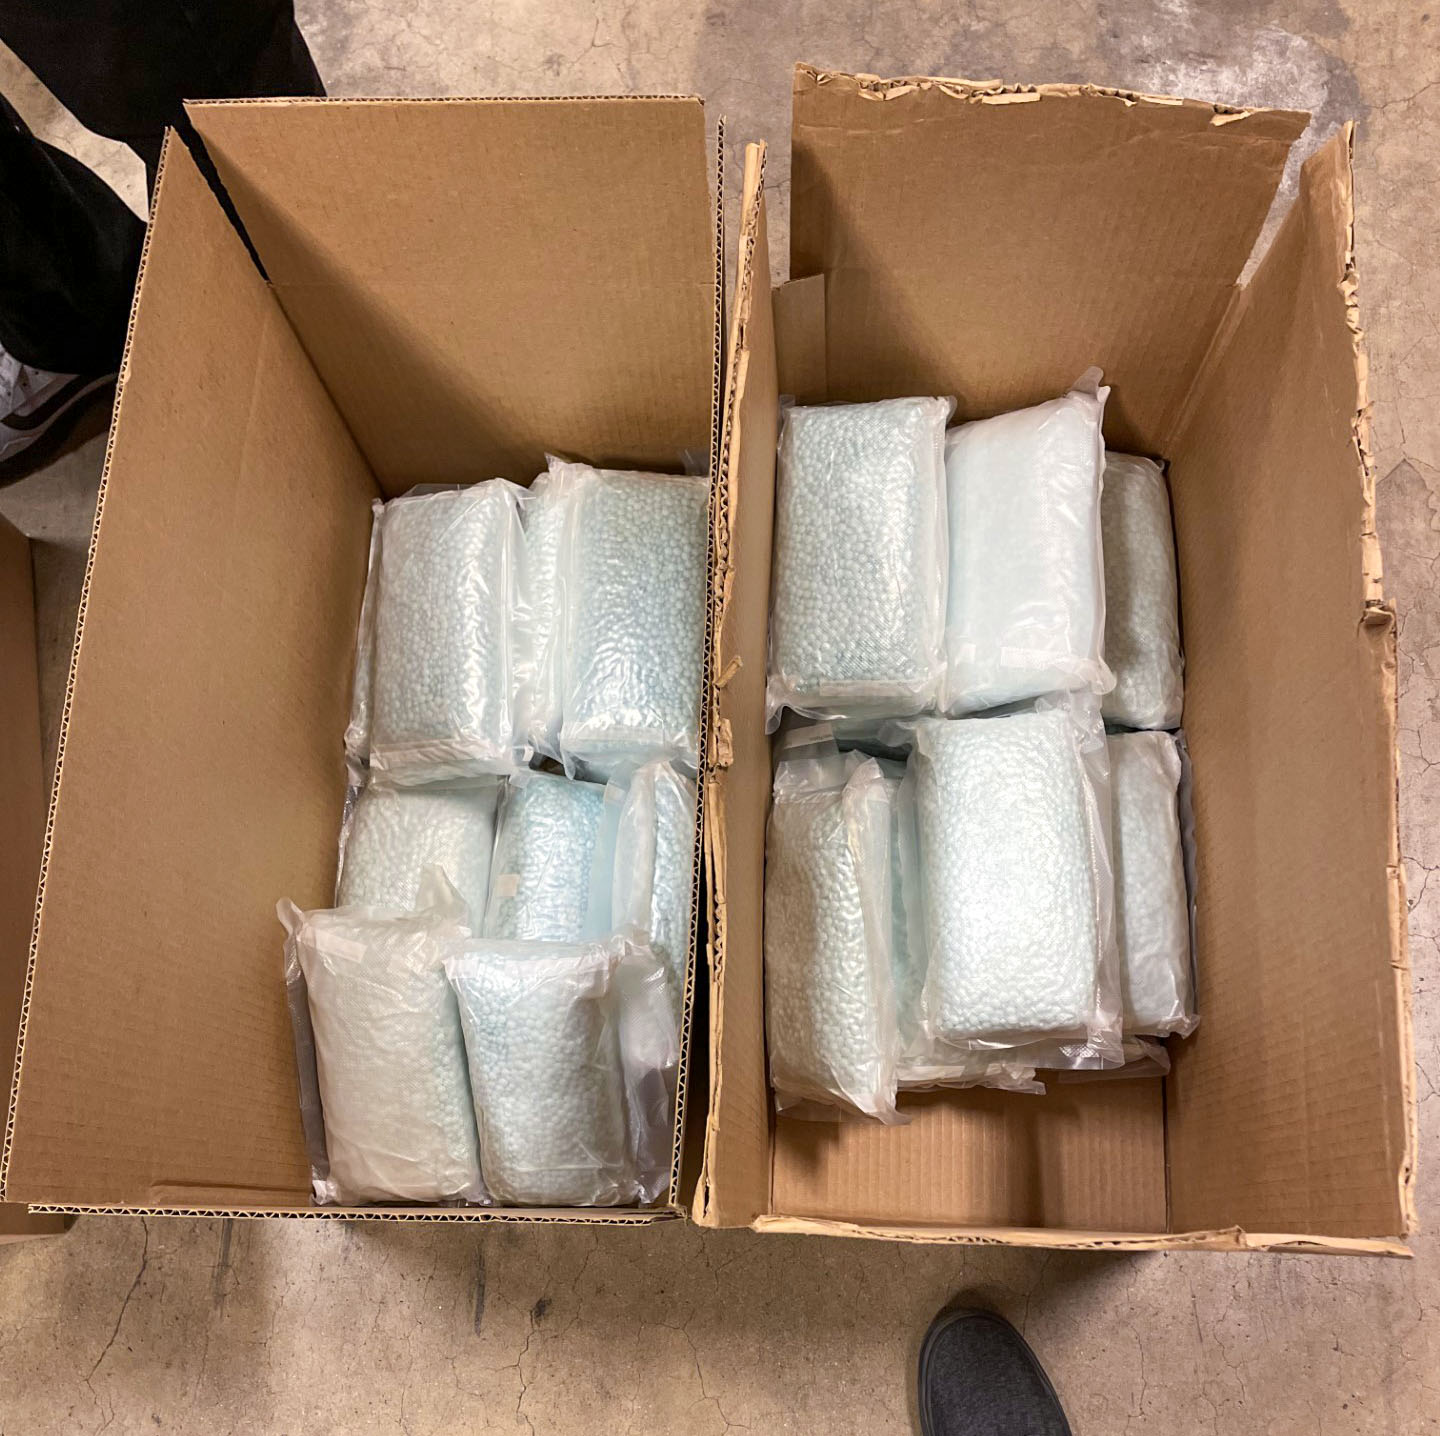 Bags of blue fentanyl-laced pills in cardboard boxes